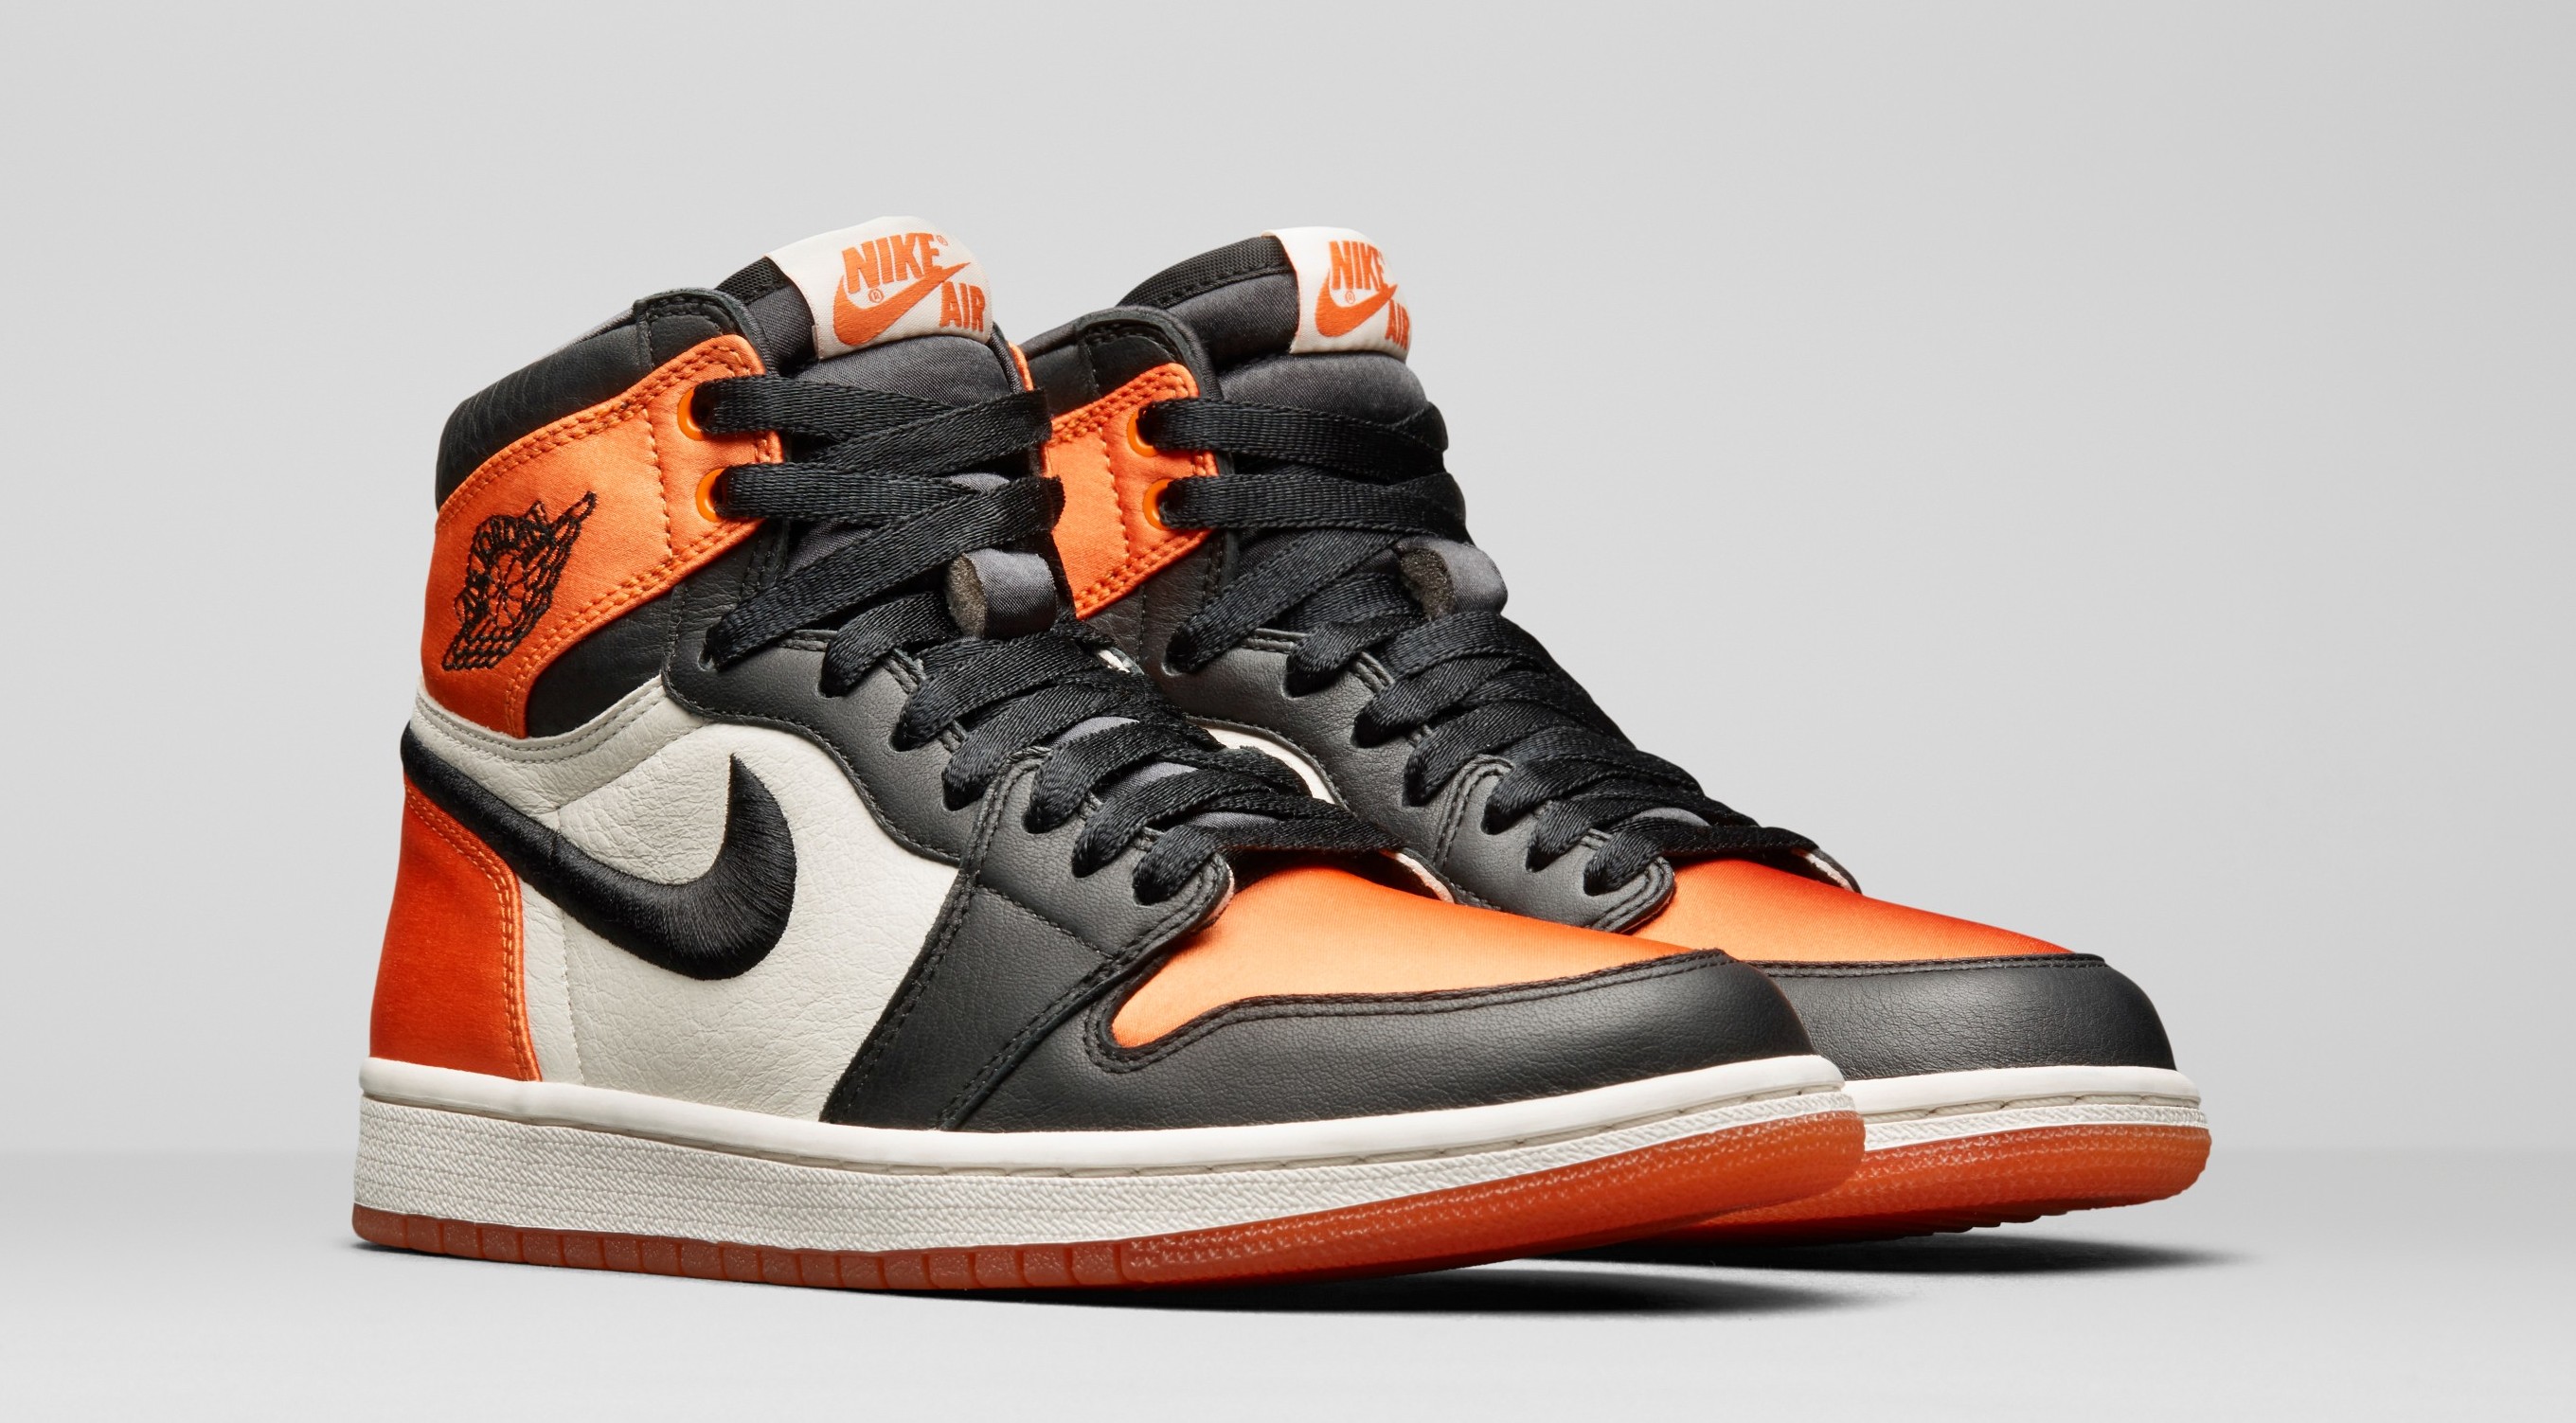 These Air Jordan 1s Have Original 'Shattered Backboard' Quality